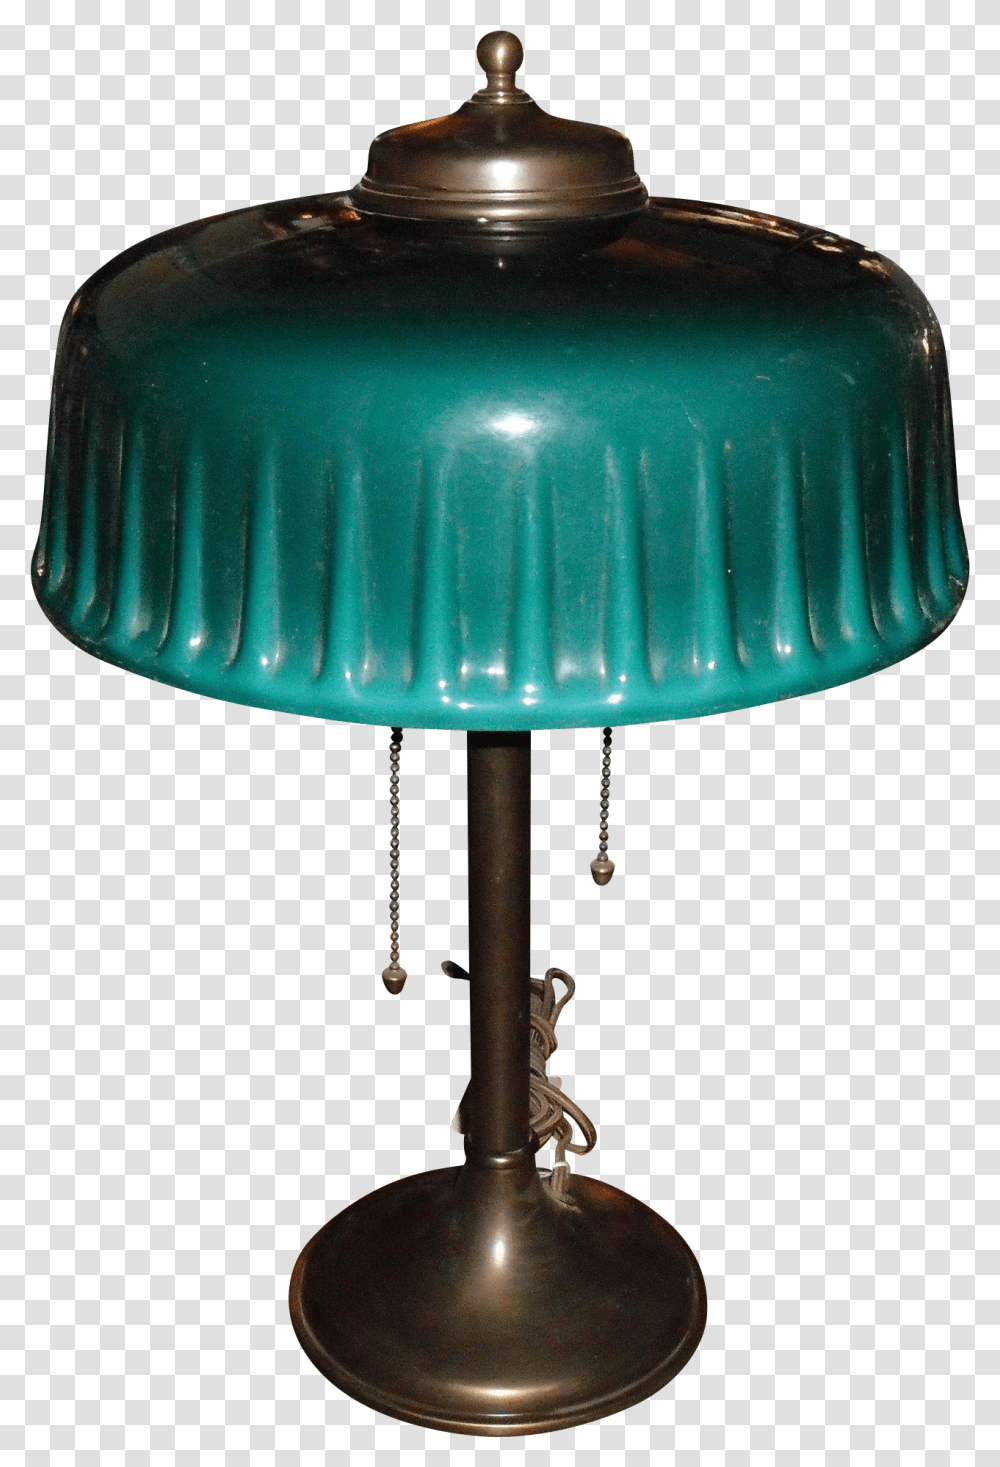 Green Lamp Table, Why Do Bankers Lamps Have Green Shades